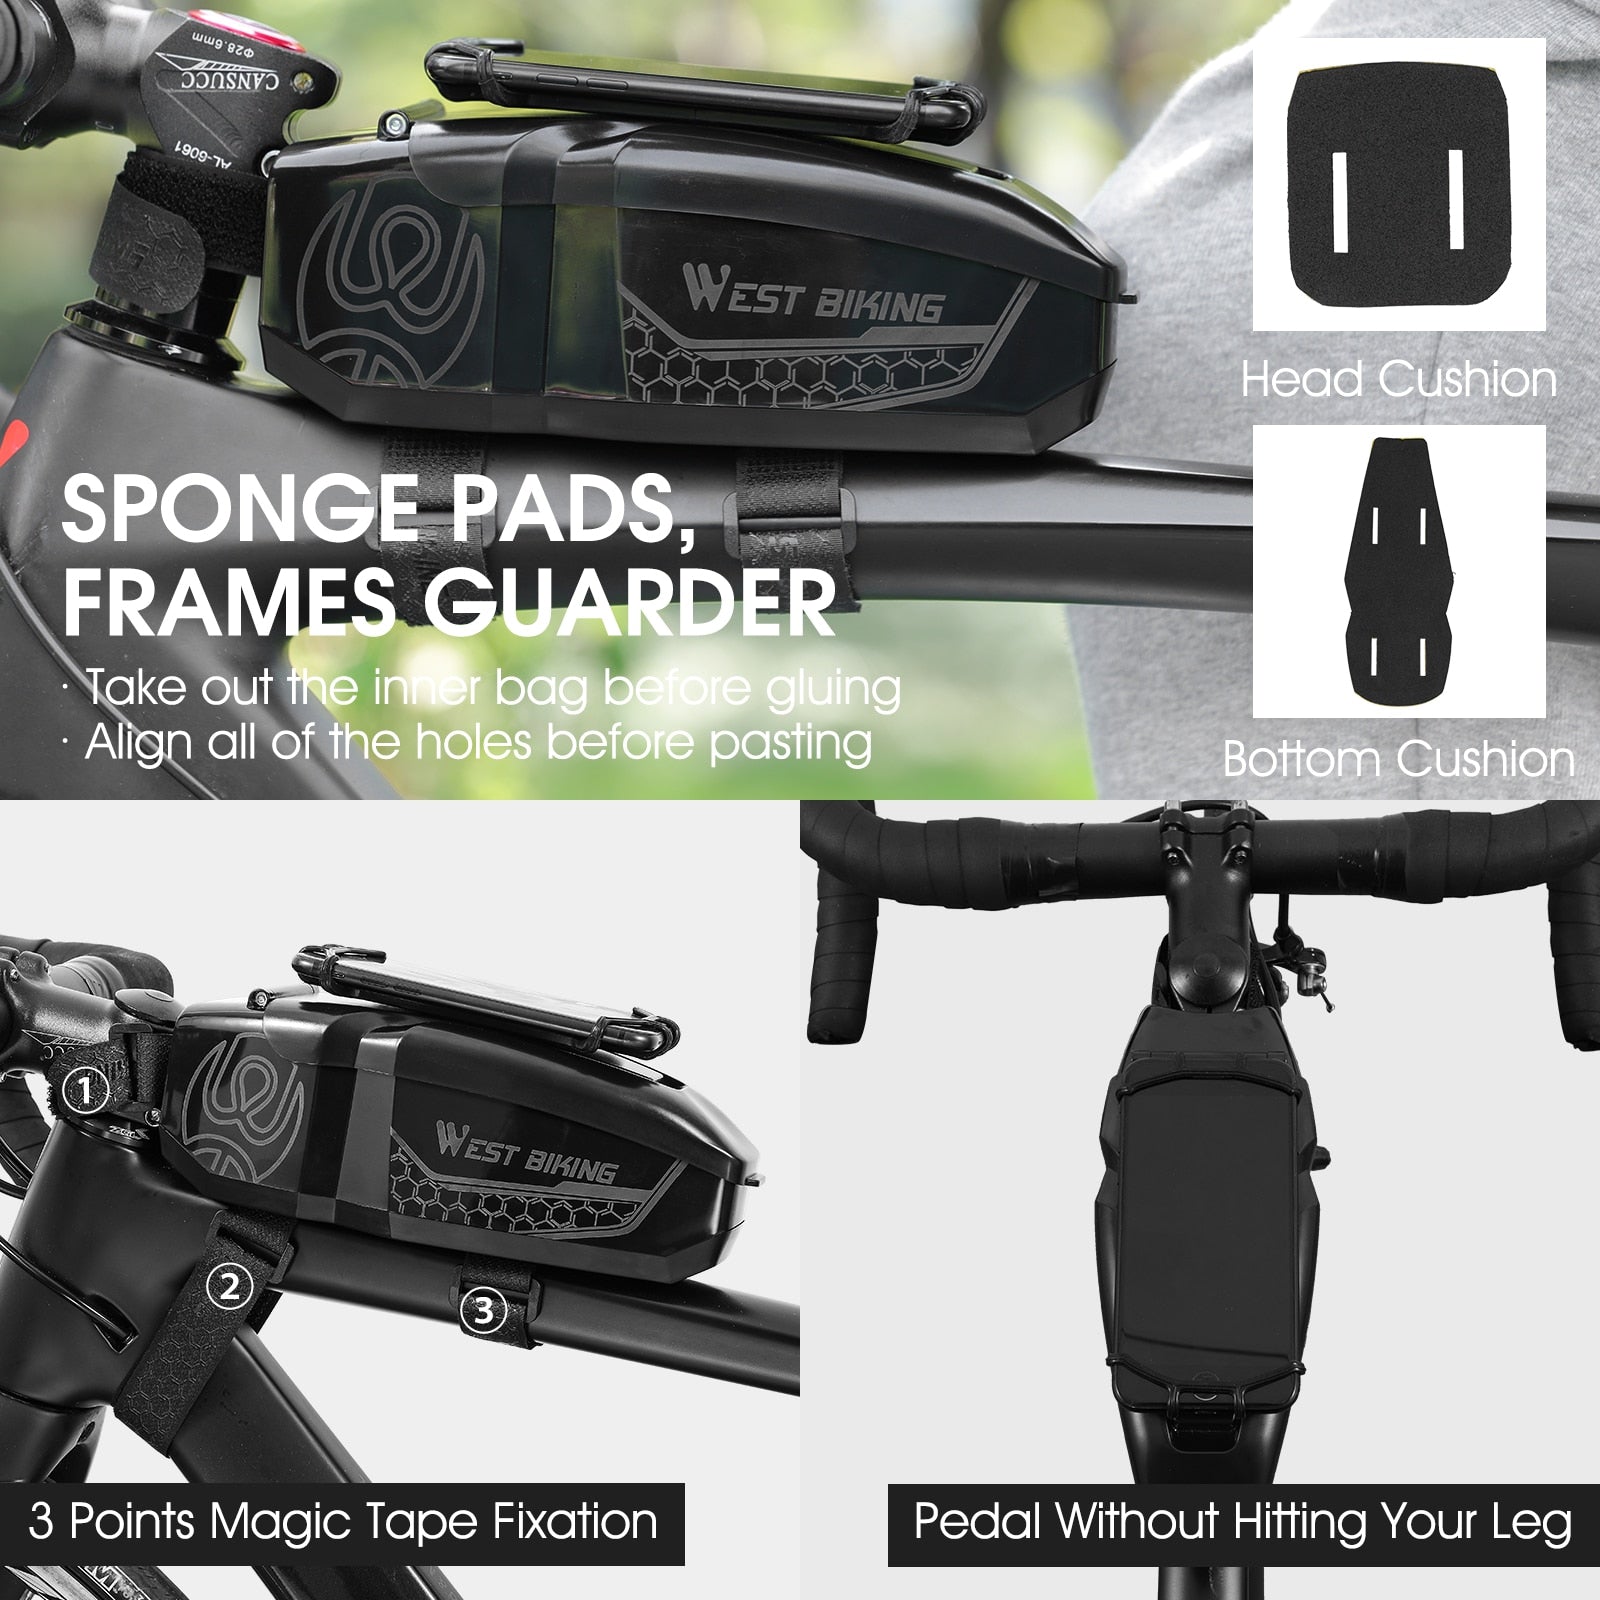 Waterproof Bicycle Bag With 4-6.5 Inch Phone Holder Front Frame Top Tube MTB Bike Bag PC Shell Cycling Accessories